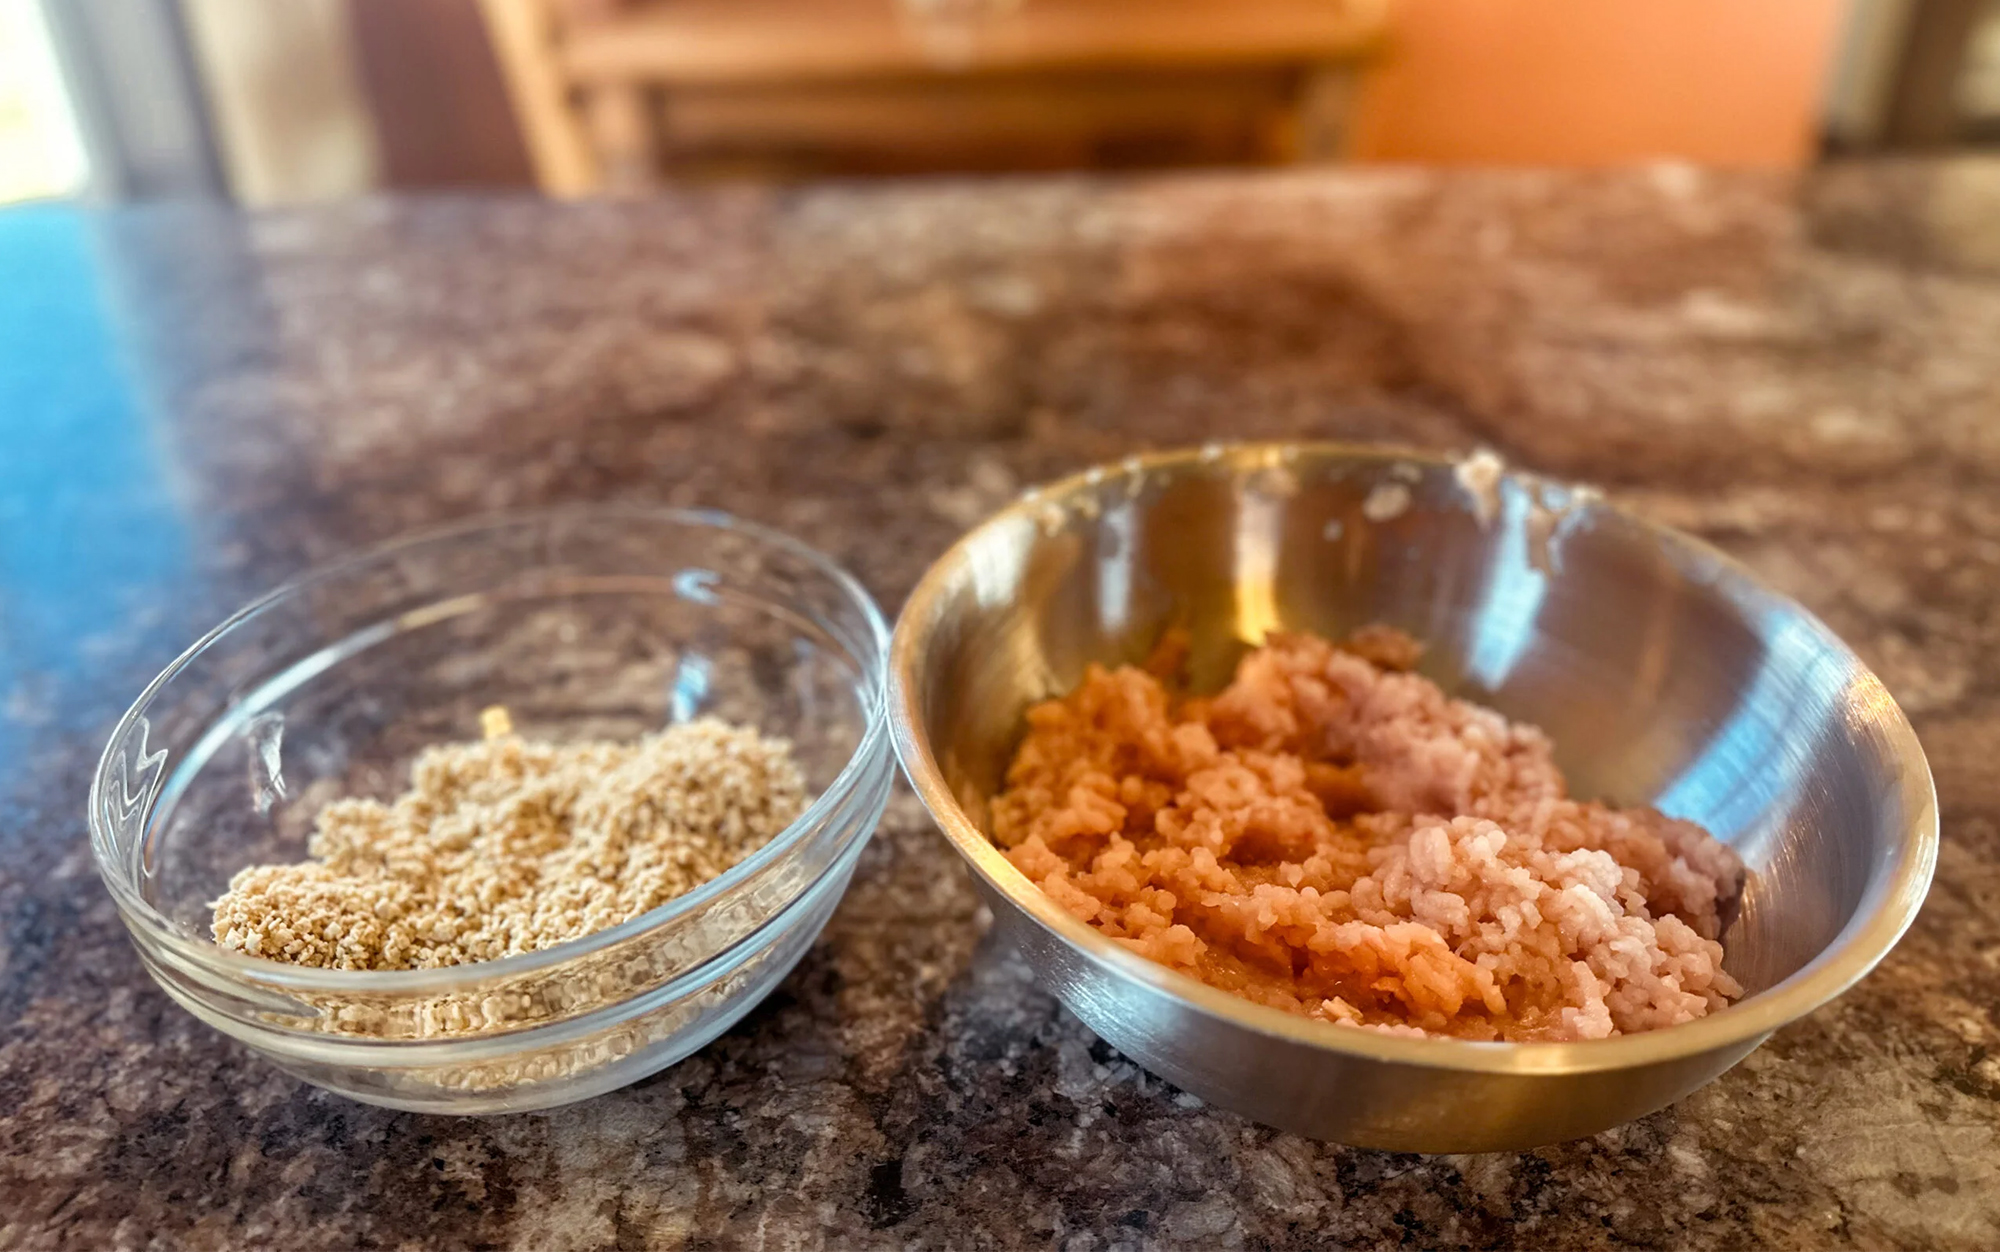 A bowl of ground meat sits next to a bowl of bread crumbs.